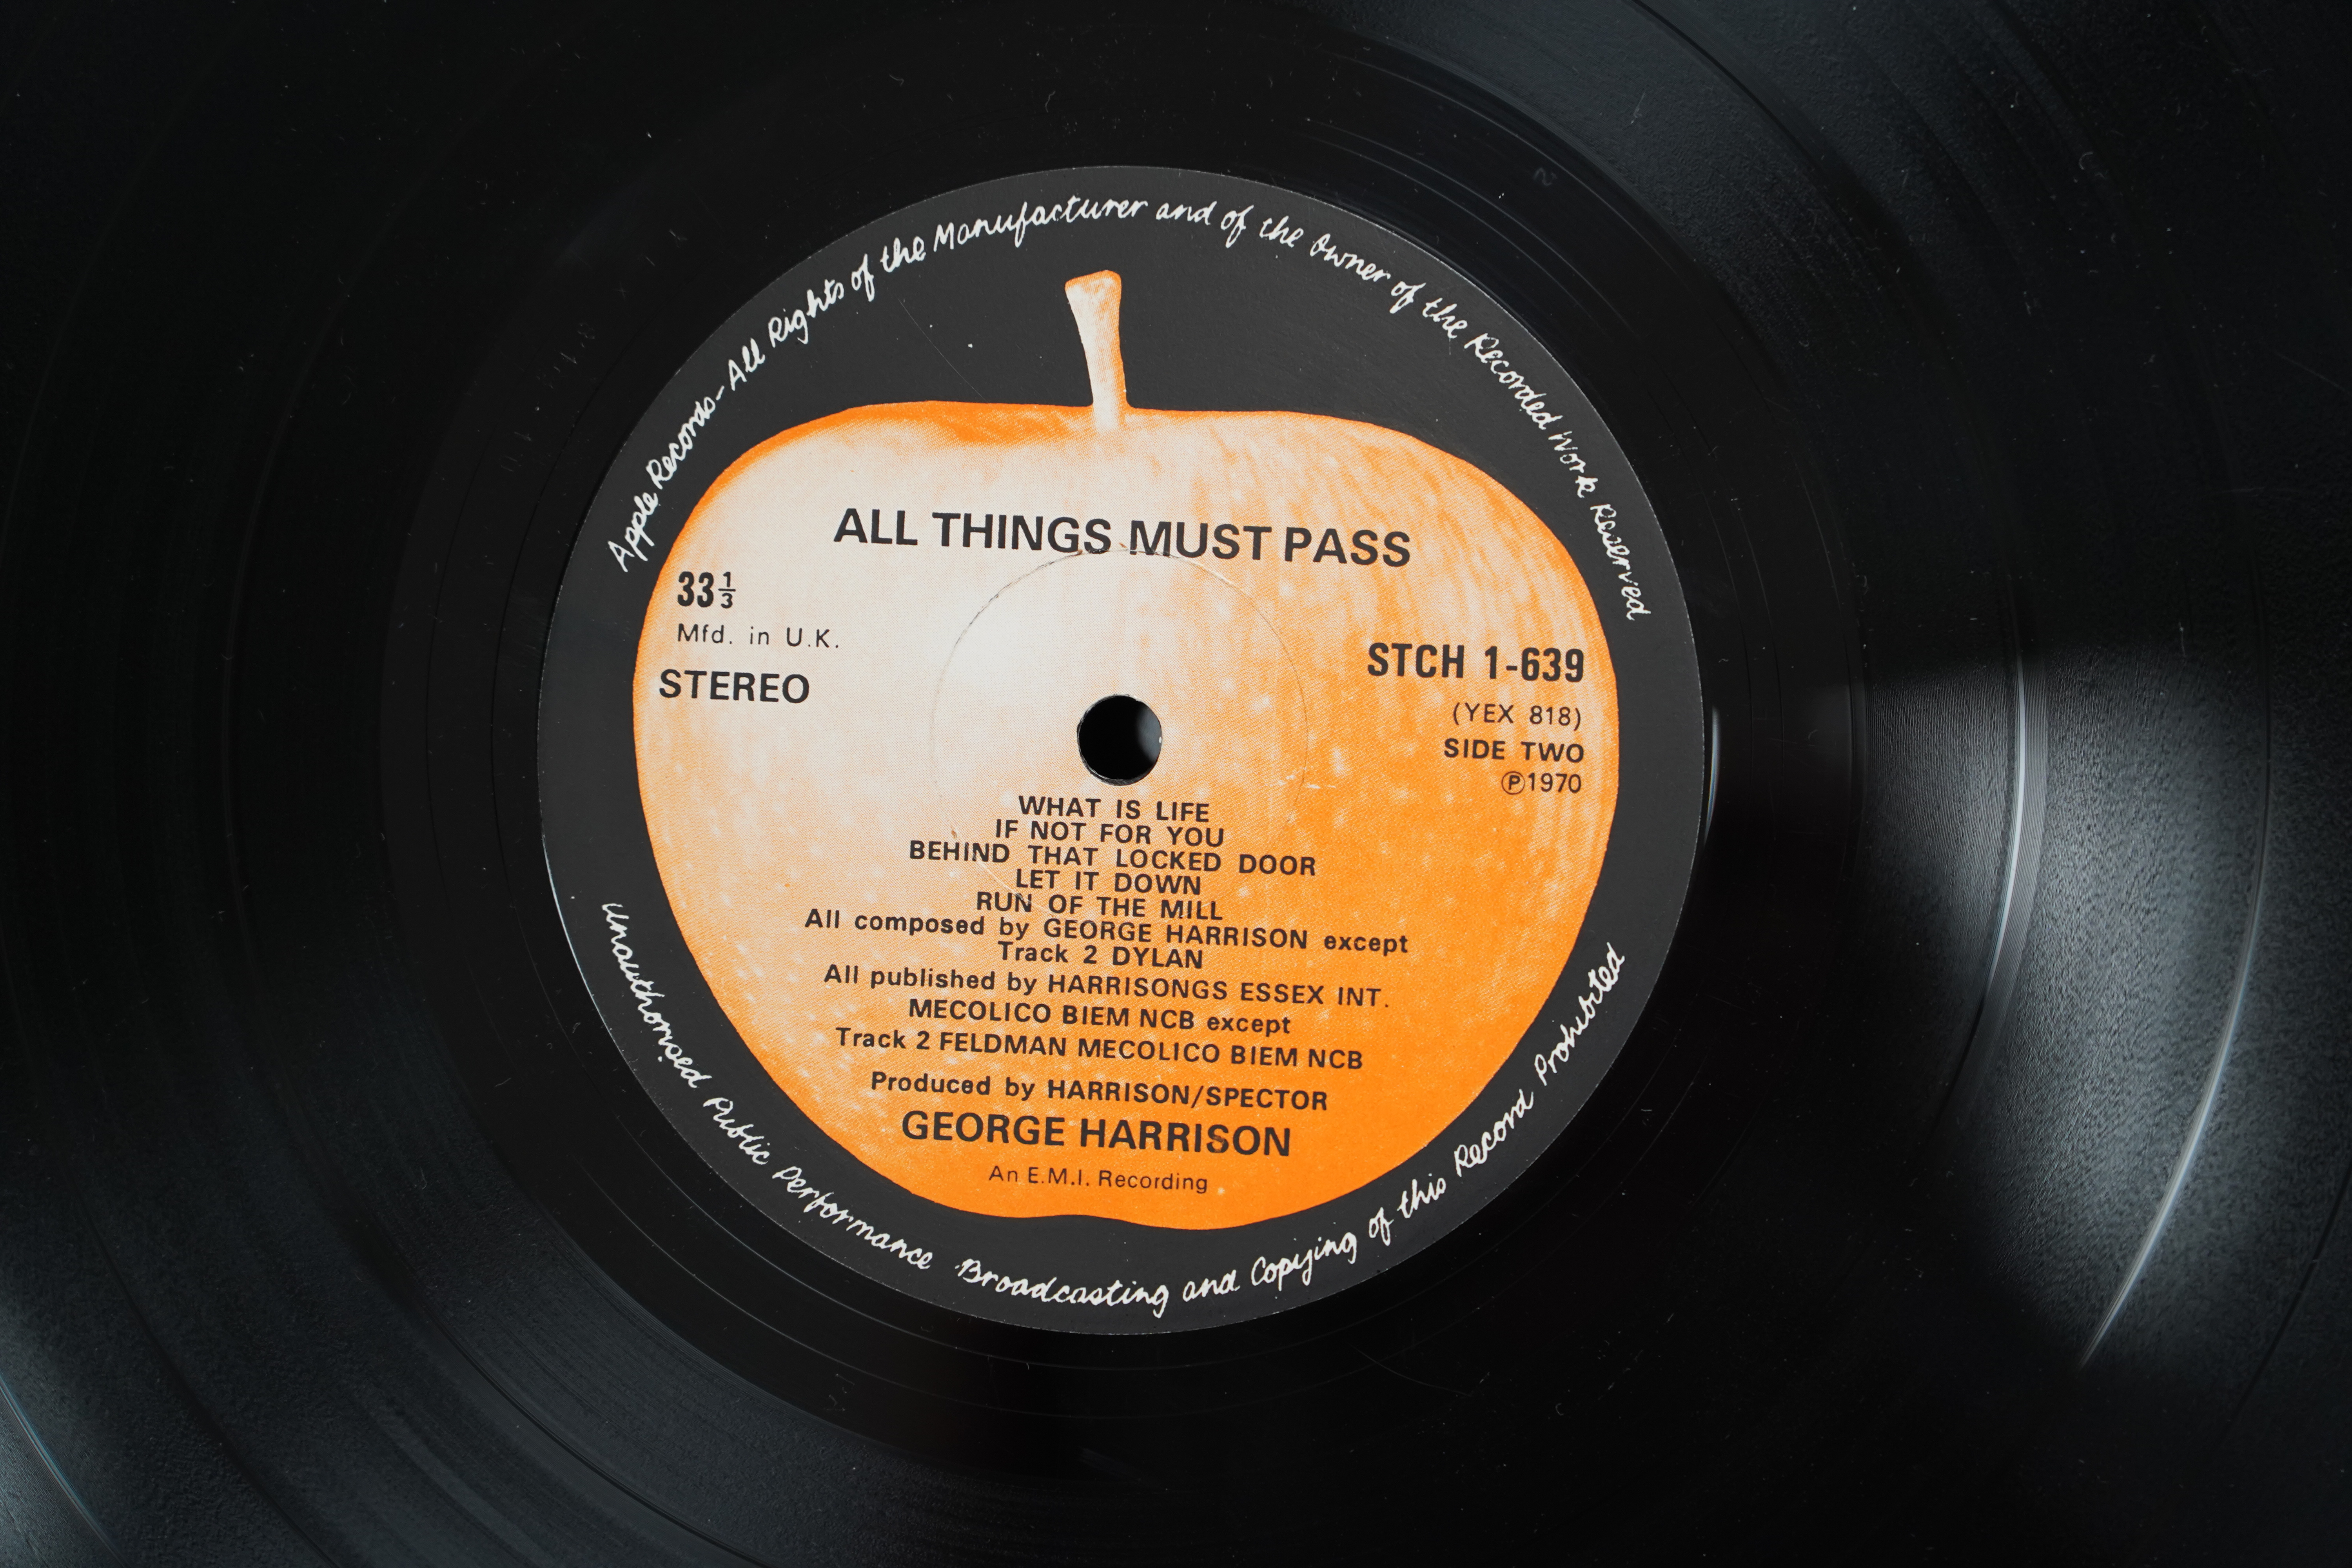 George Harrison, All Things Must Pass 3-LP box set (missing poster), STH 1-639. Condition - fair